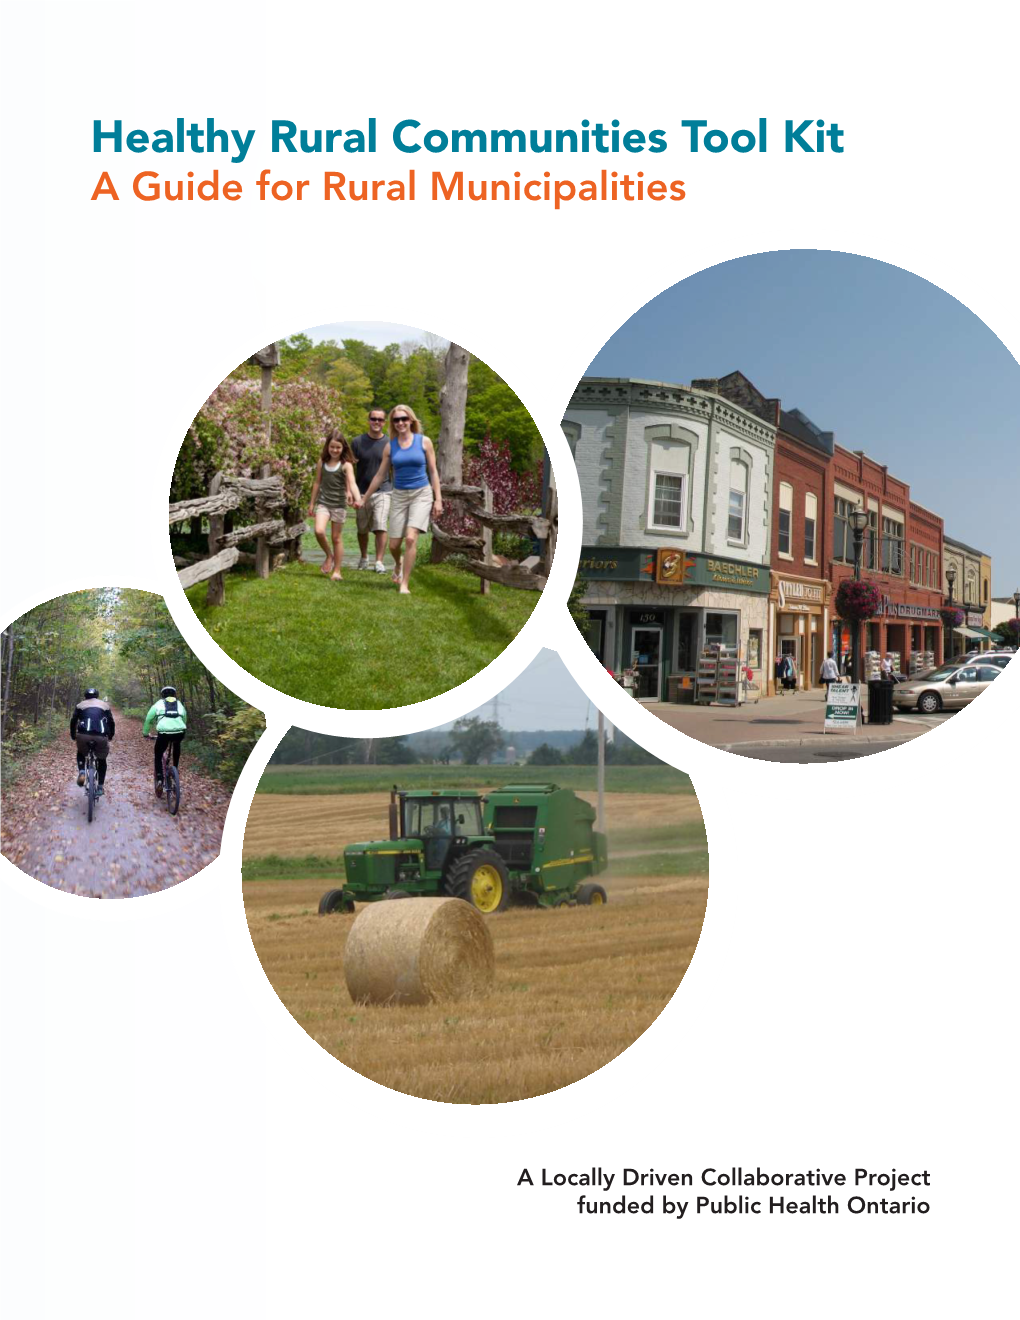 Healthy Rural Communities Tool Kit a Guide for Rural Municipalities